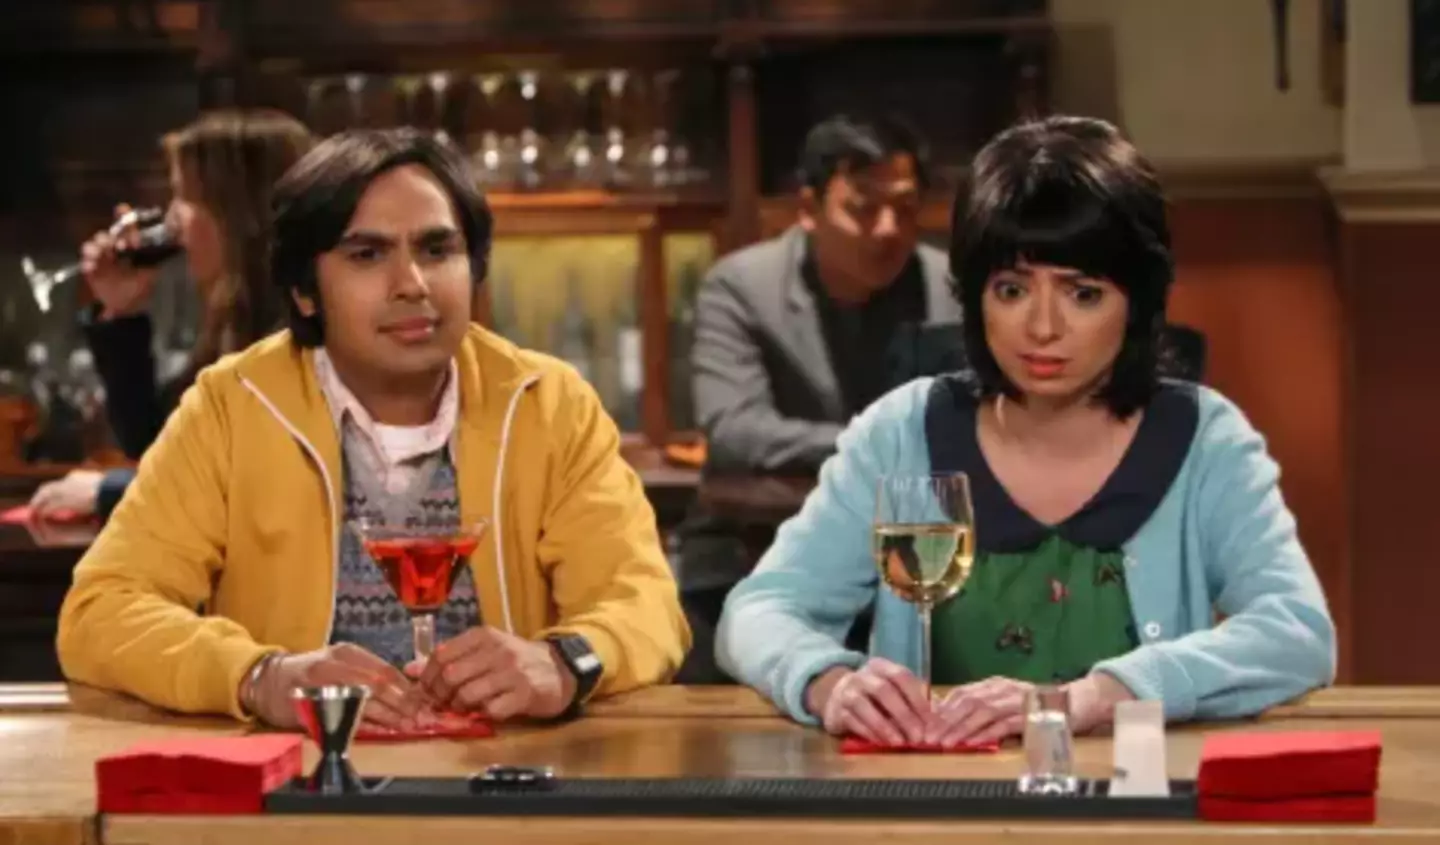 Kate Micucci as Lucy in Big Bang Theory.